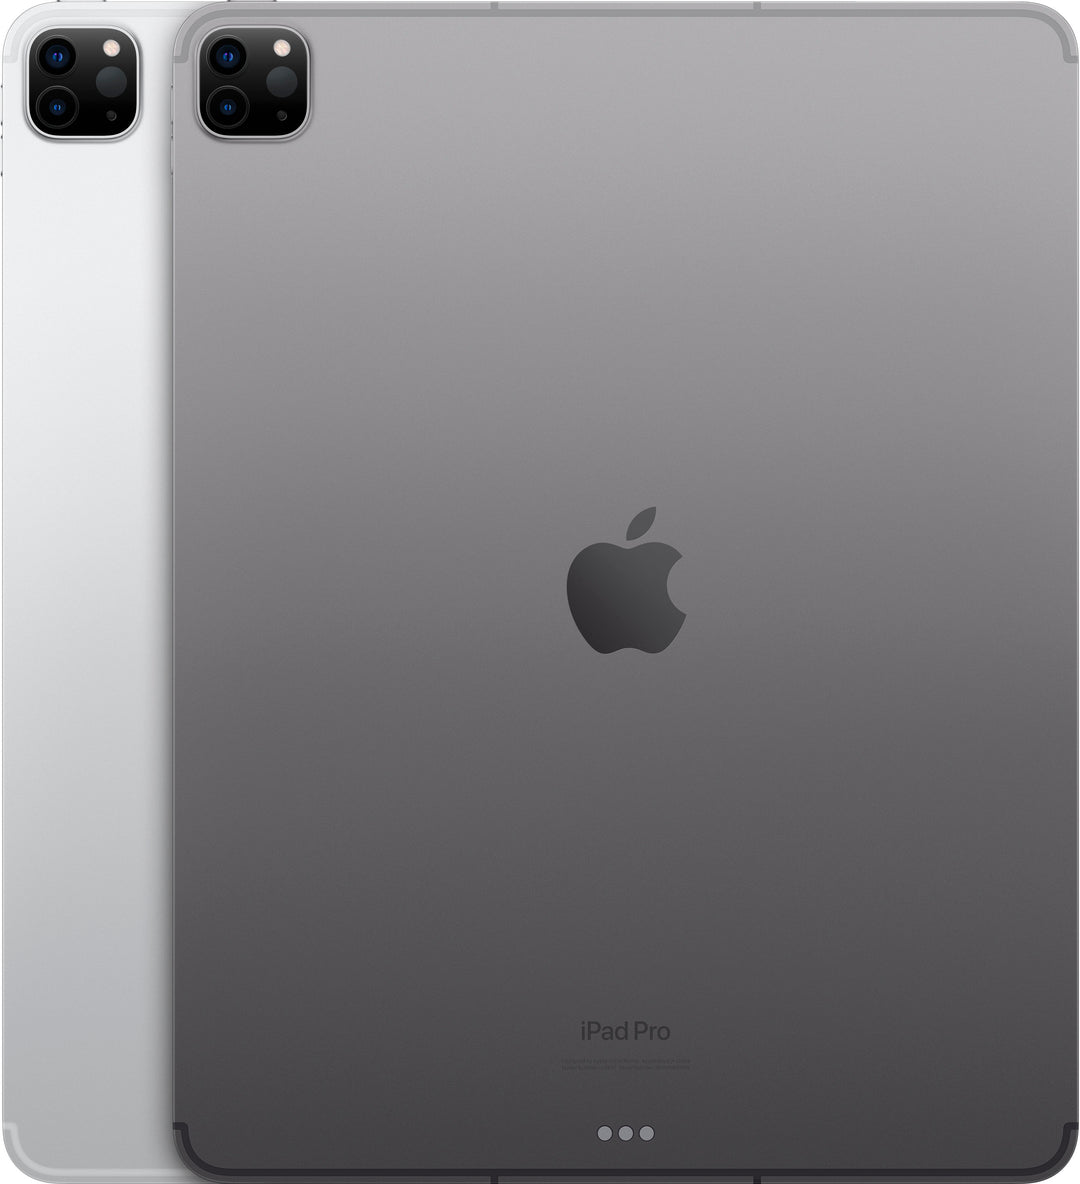 Apple - 12.9-Inch iPad Pro (Latest Model) with Wi-Fi + Cellular - 128GB - Space Gray (AT&T)_3